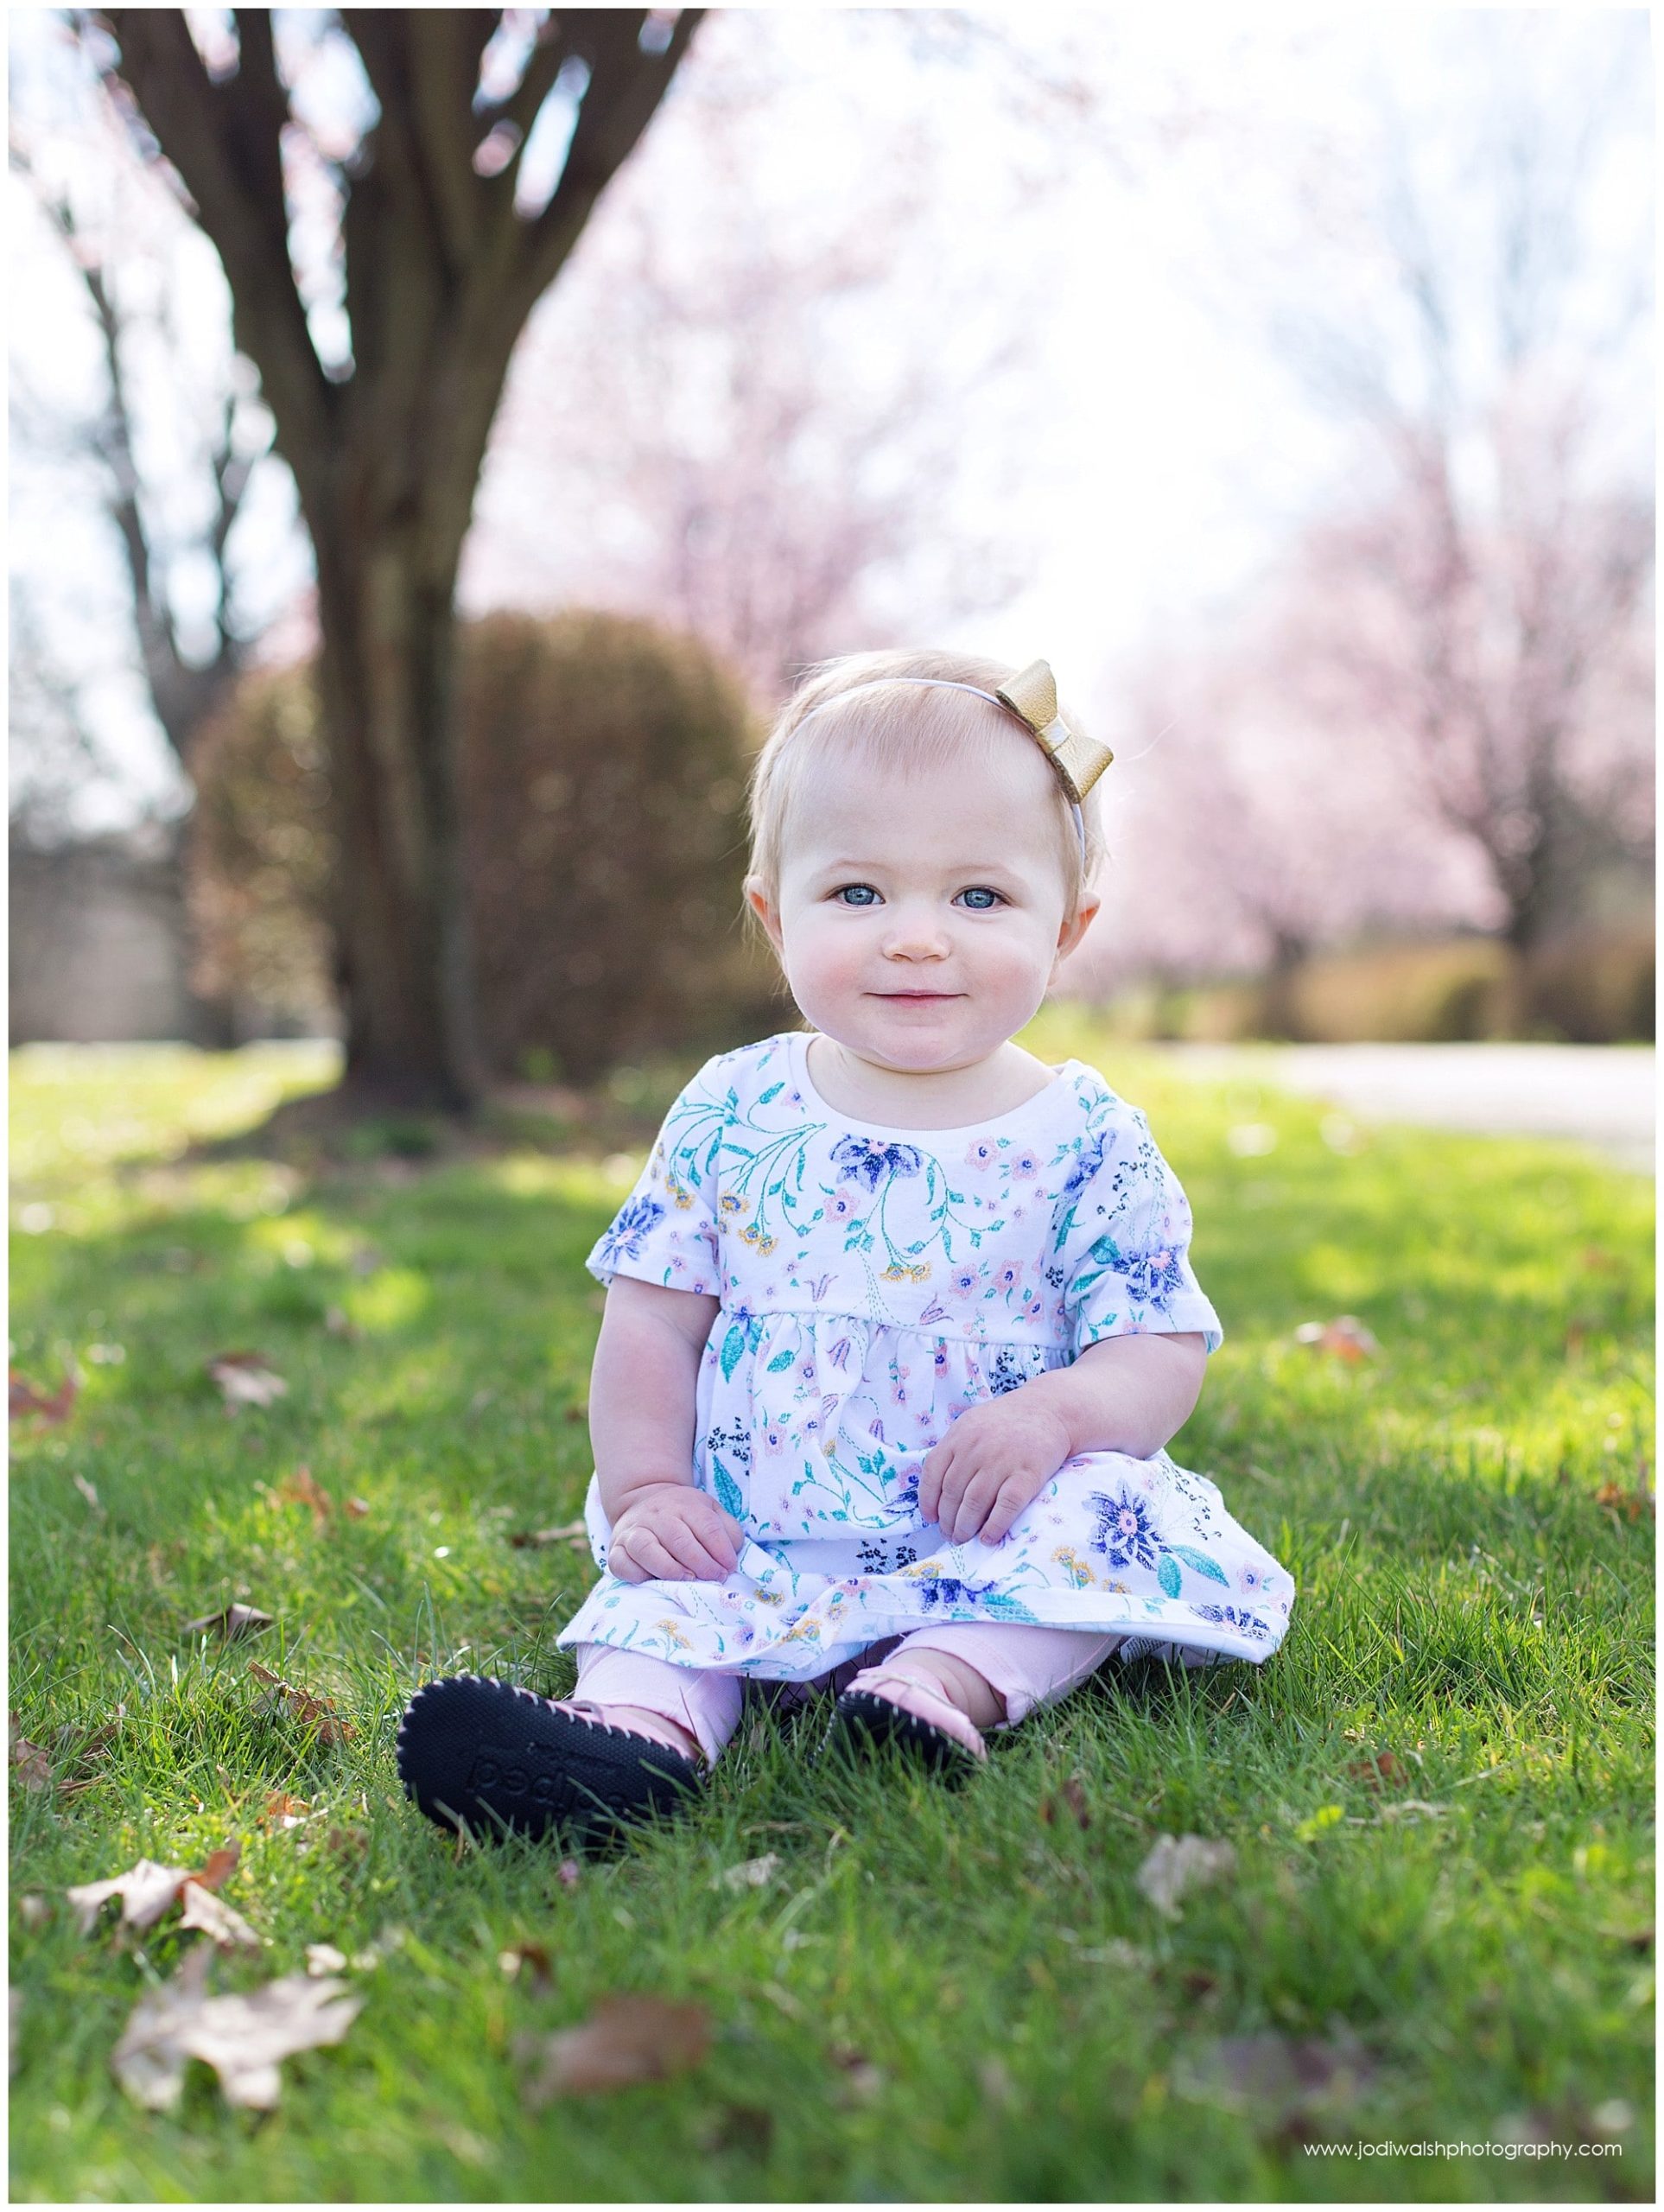 1 year old baby girl sitting in the grass with pink trees behind her